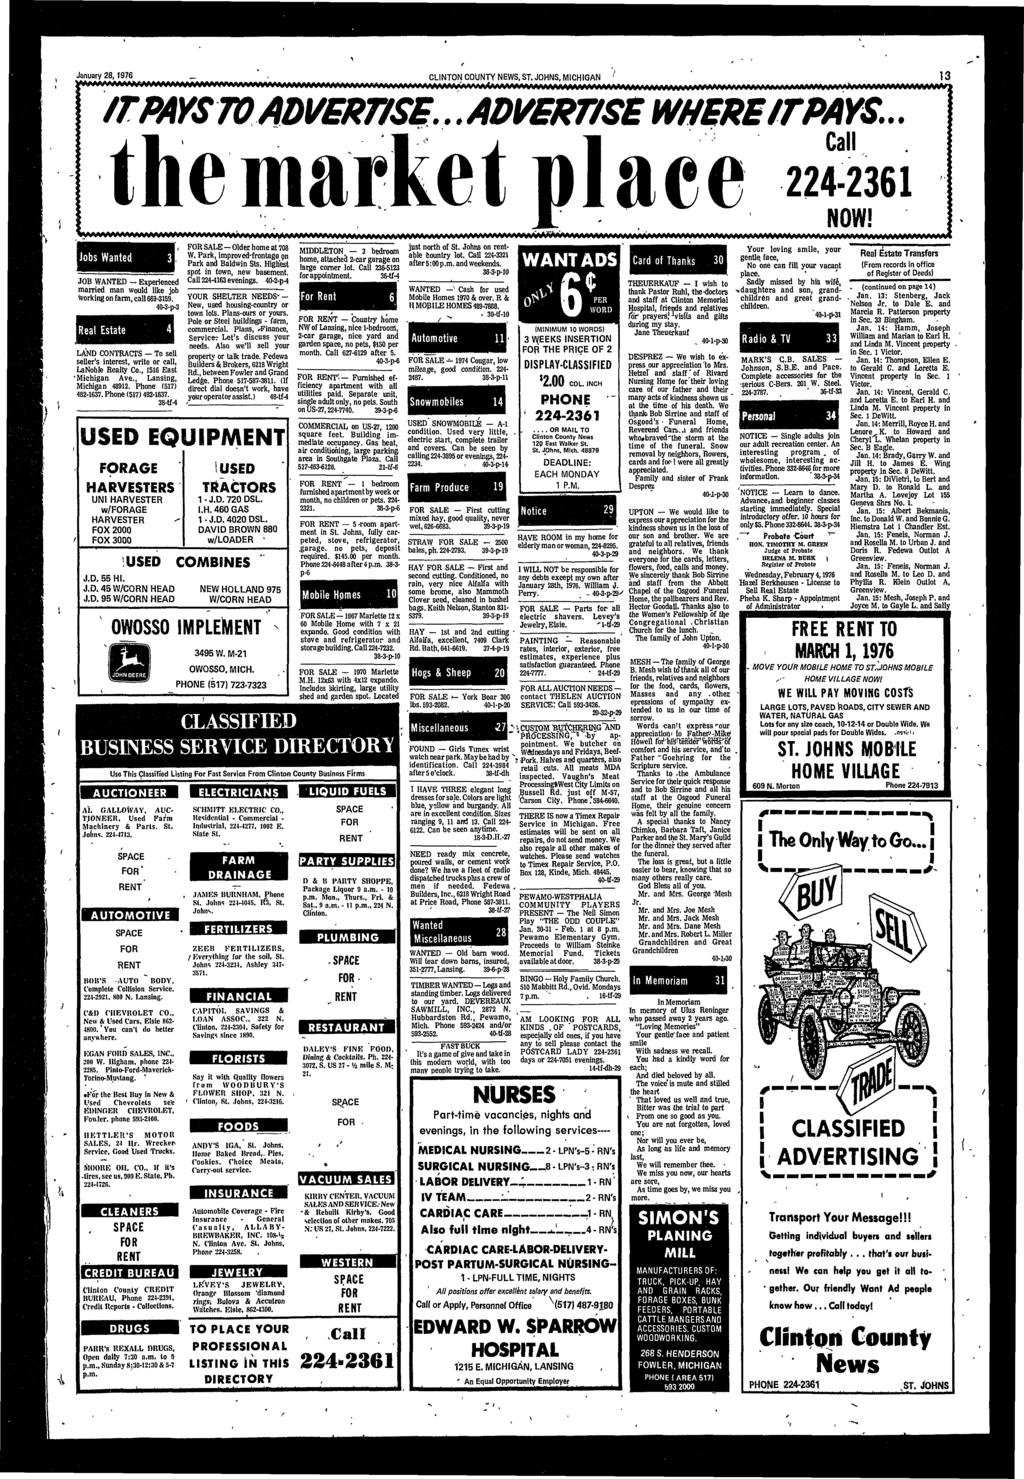 January 28,1976 CLINTON COUNTY NEWS, ST. JOHNS, MICHIGAN IT PAYS W ADVERTISE... ADVERTISE WHERE IT PAYS... ace 2361 NOW!